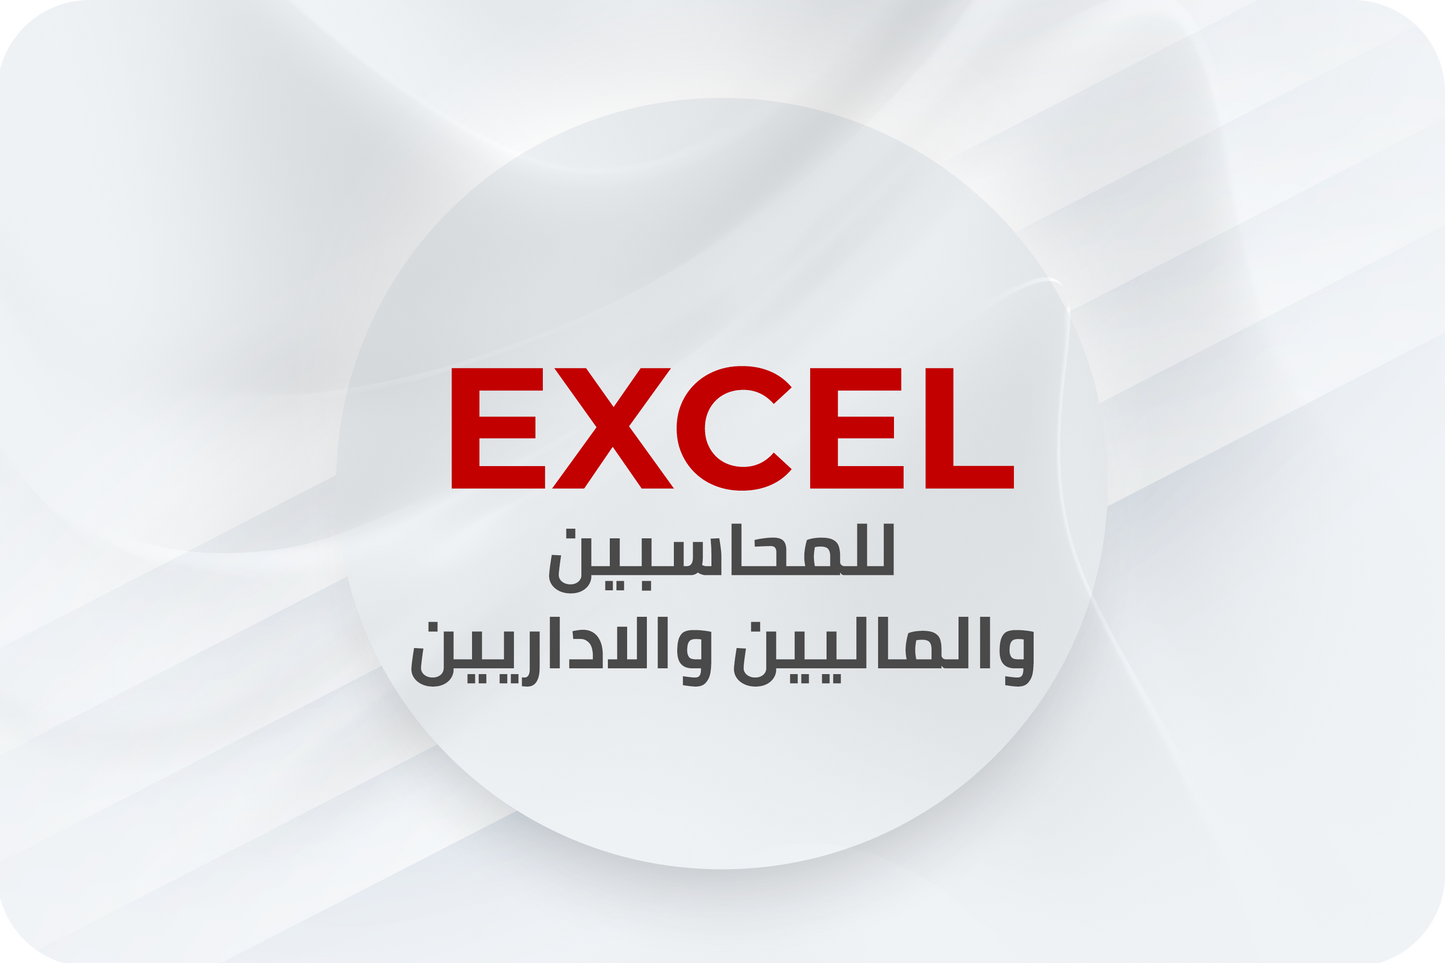 Excel course for accountants and finance